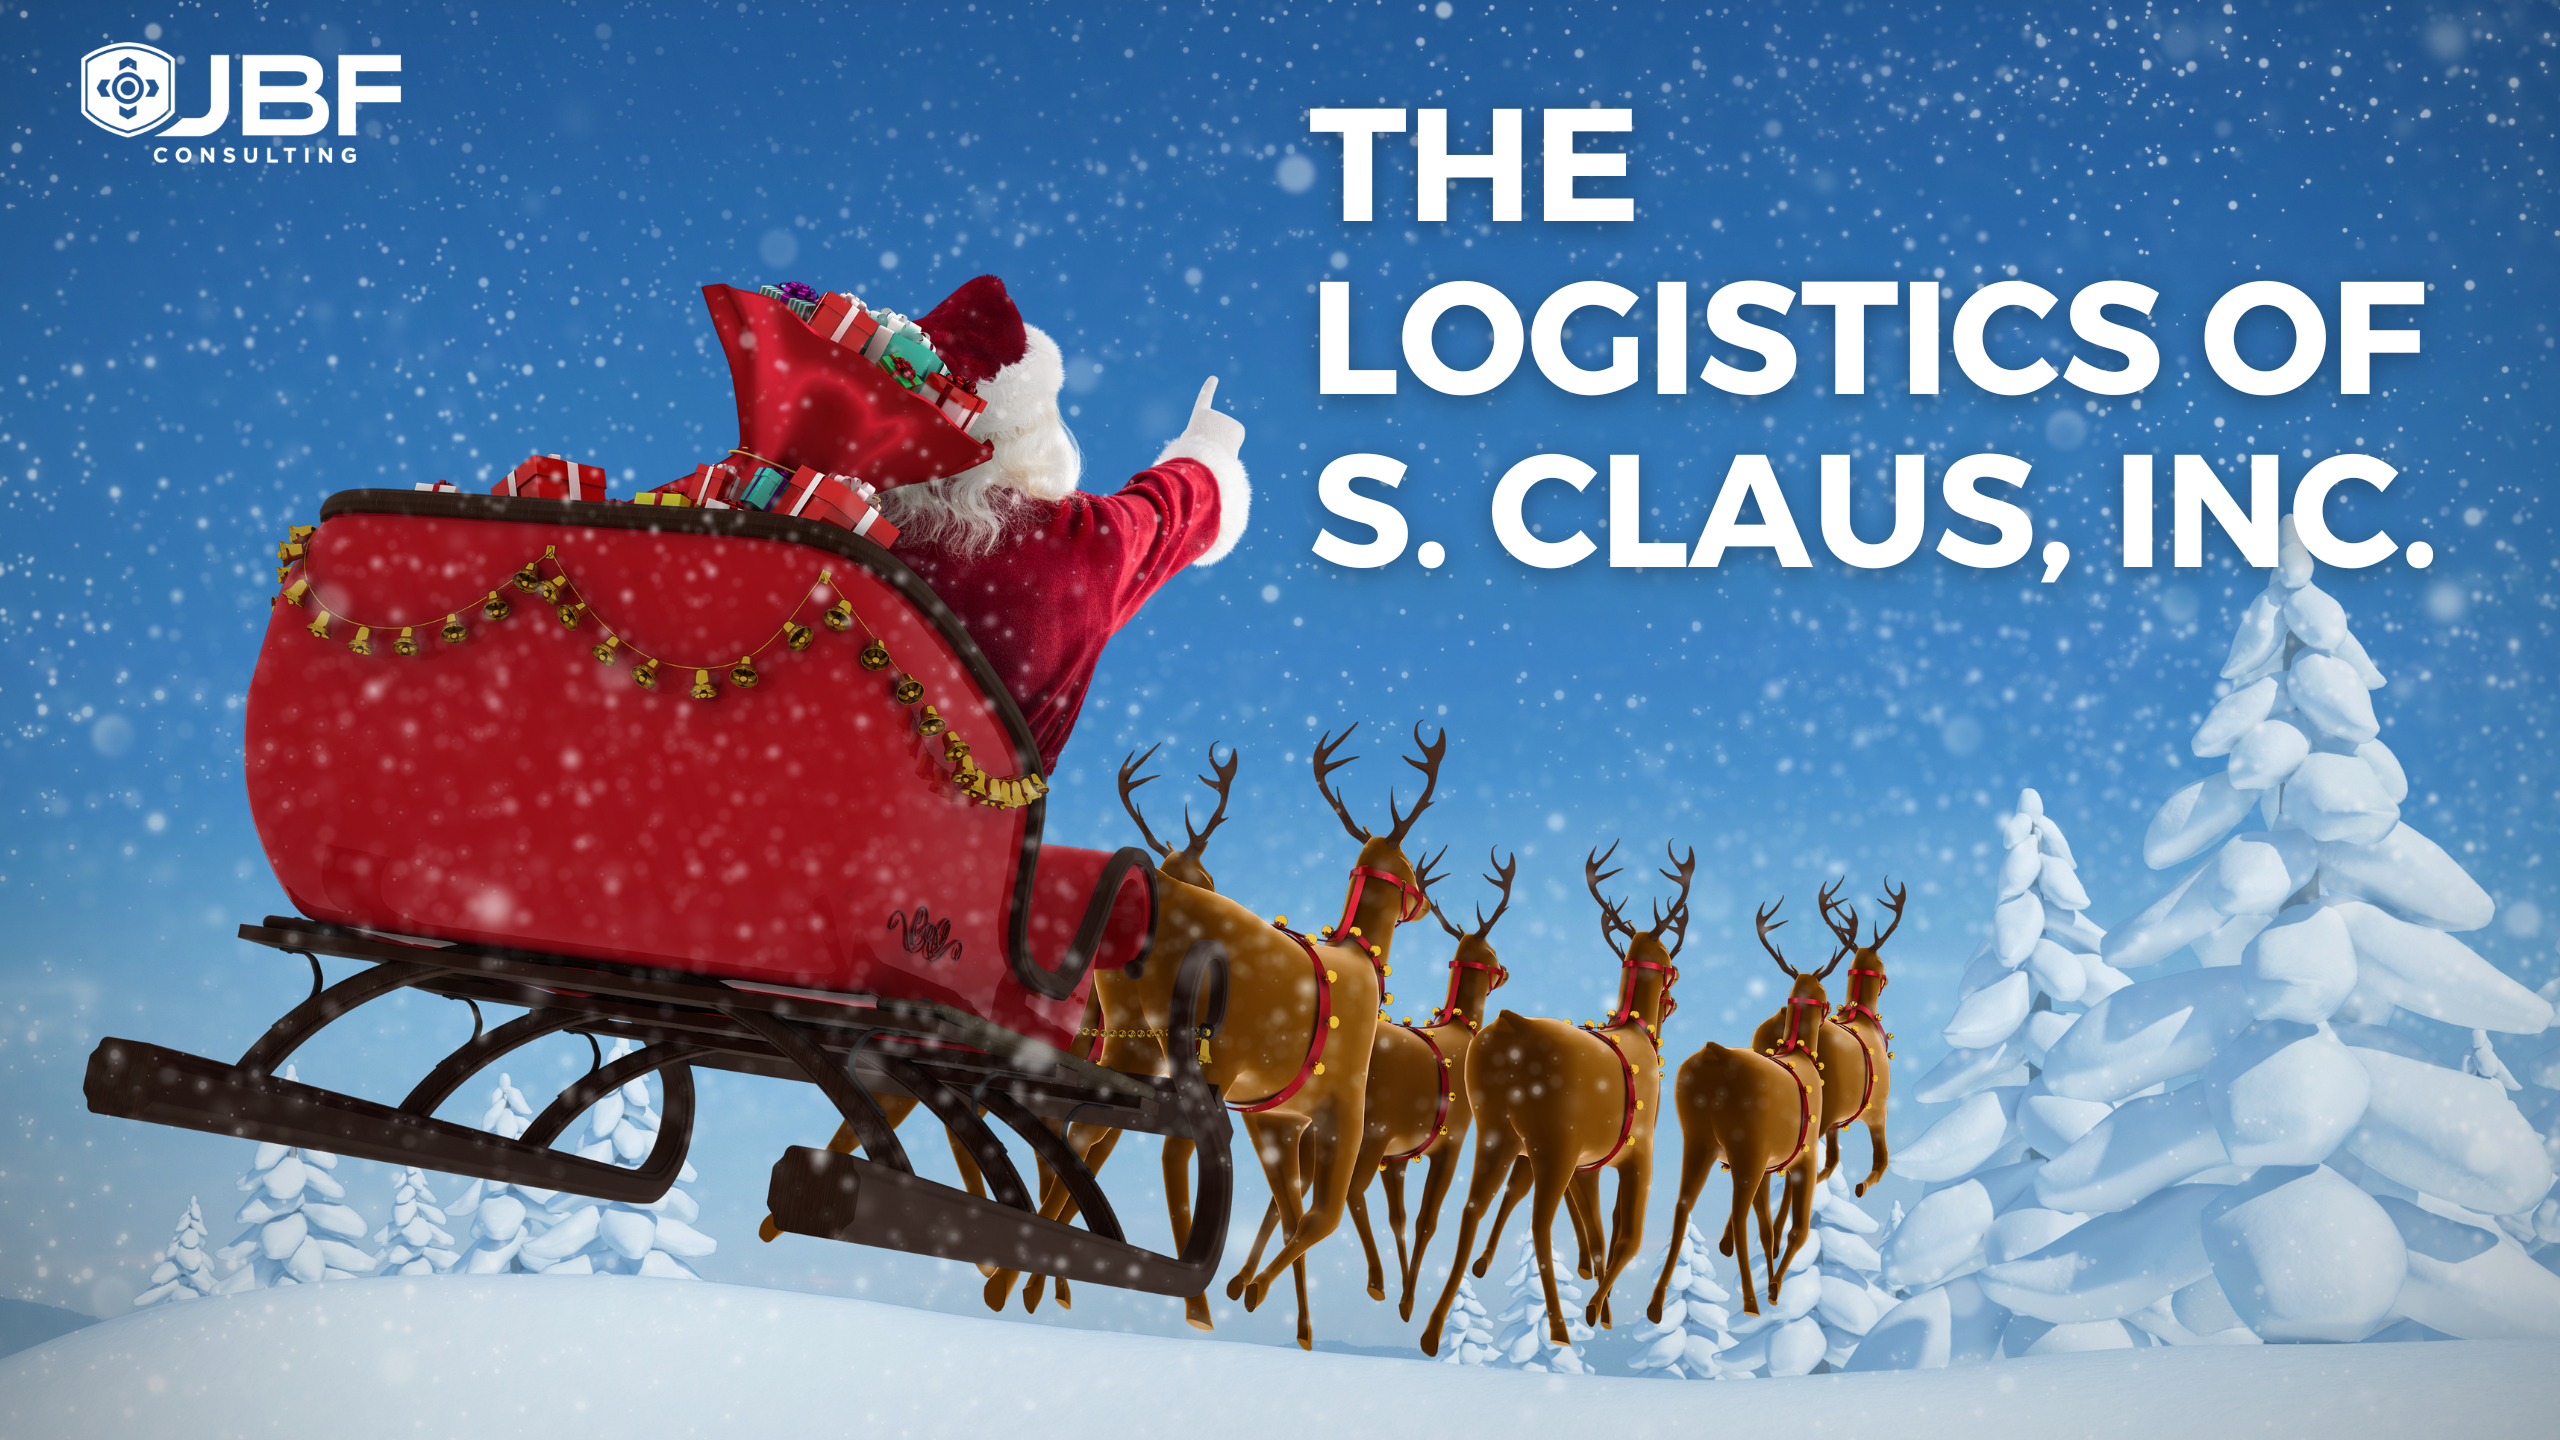 The Logistics of S. Claus